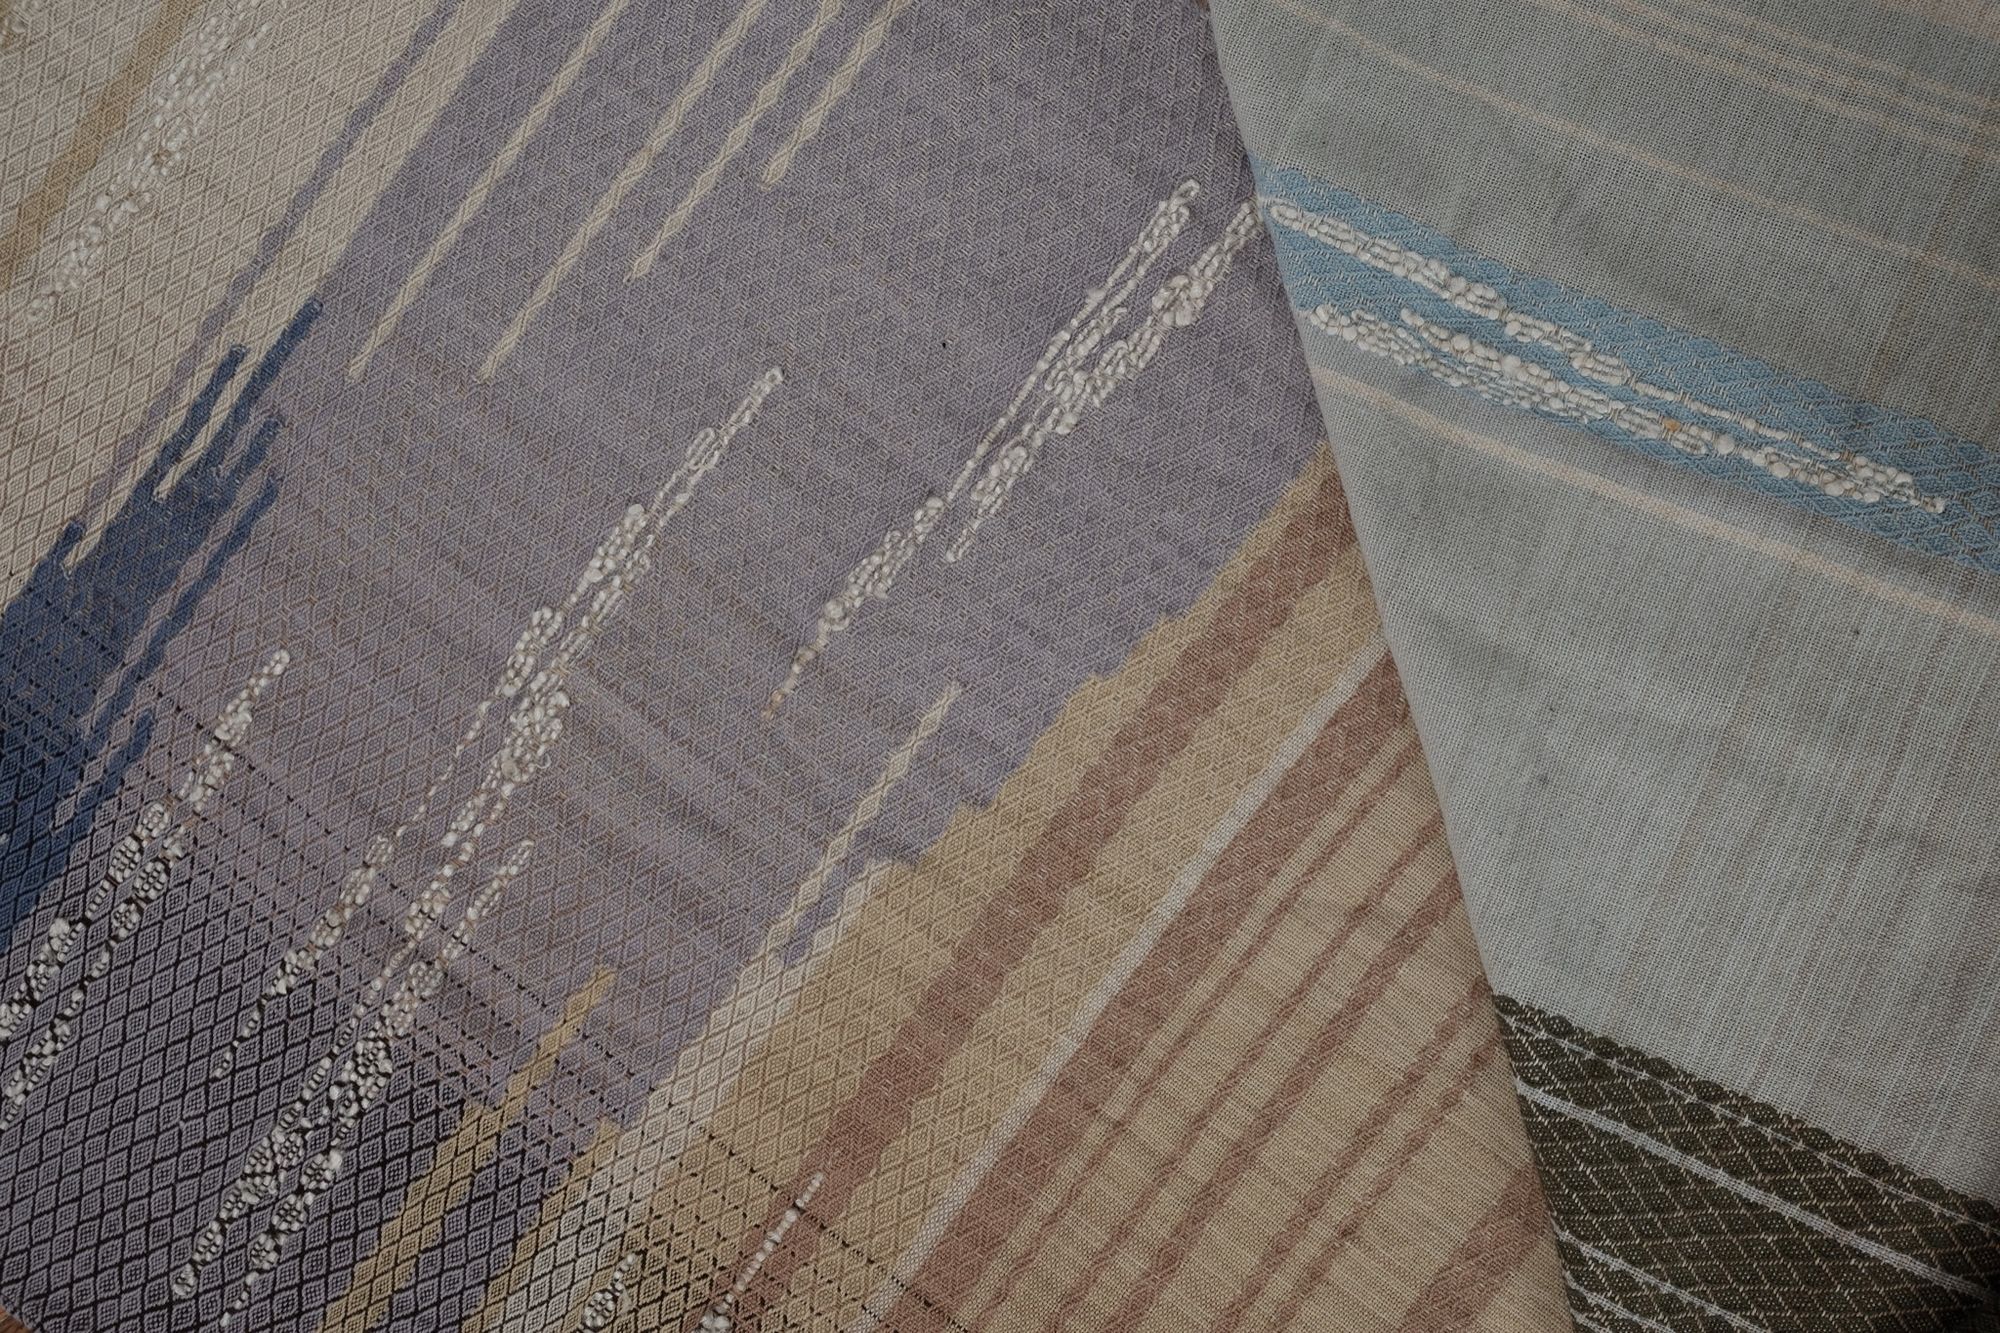 A long piece of handwoven fabric with diamond pattern in lilac purple, dark brown and earth tones is resting on a wooden floor